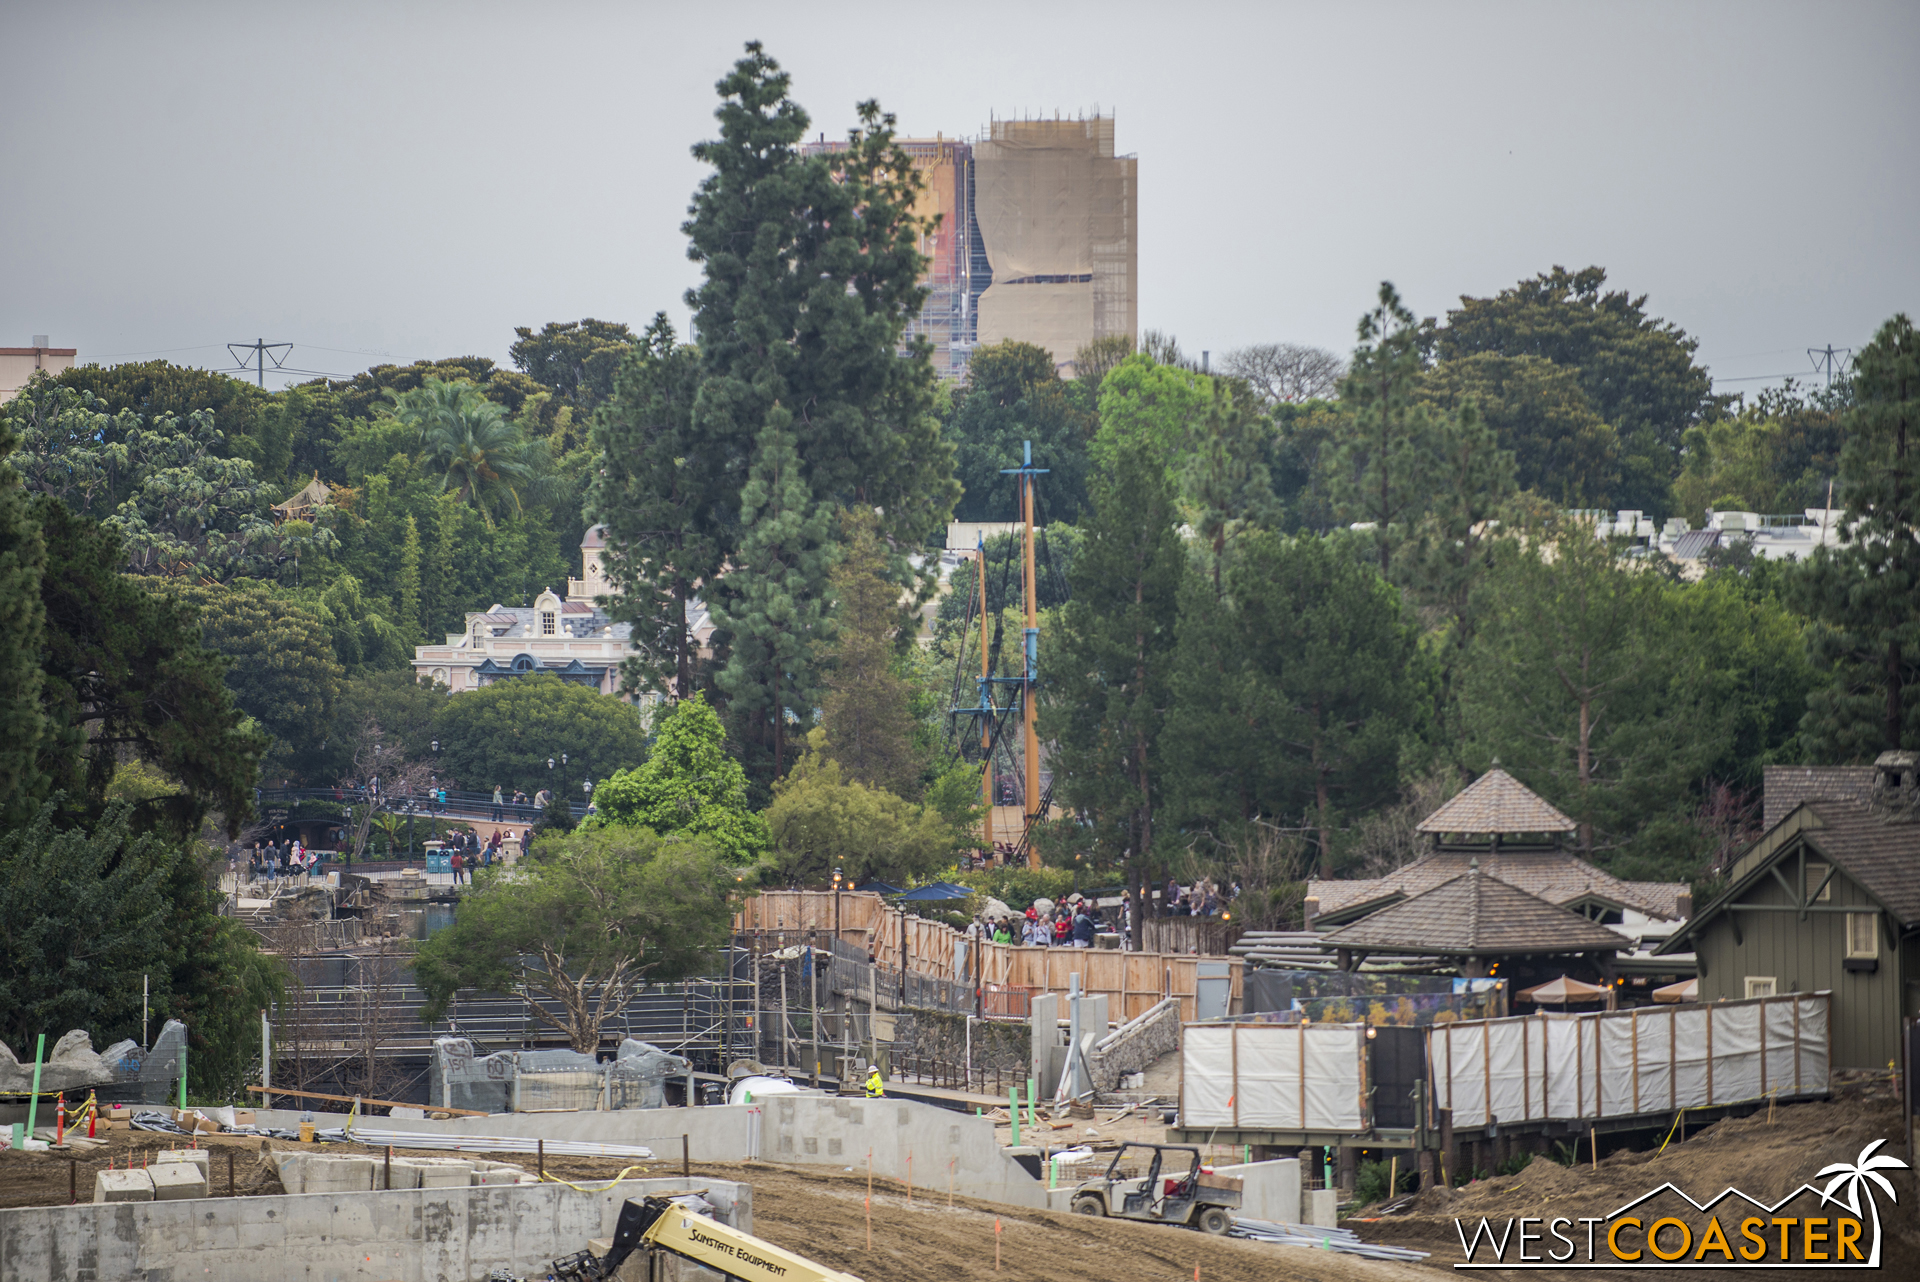  You can see the backside of the temporary dam on the Rivers of American on the left half of this photo, above the "Sunstate Equipment" lift and behind that branchy looking tree. 